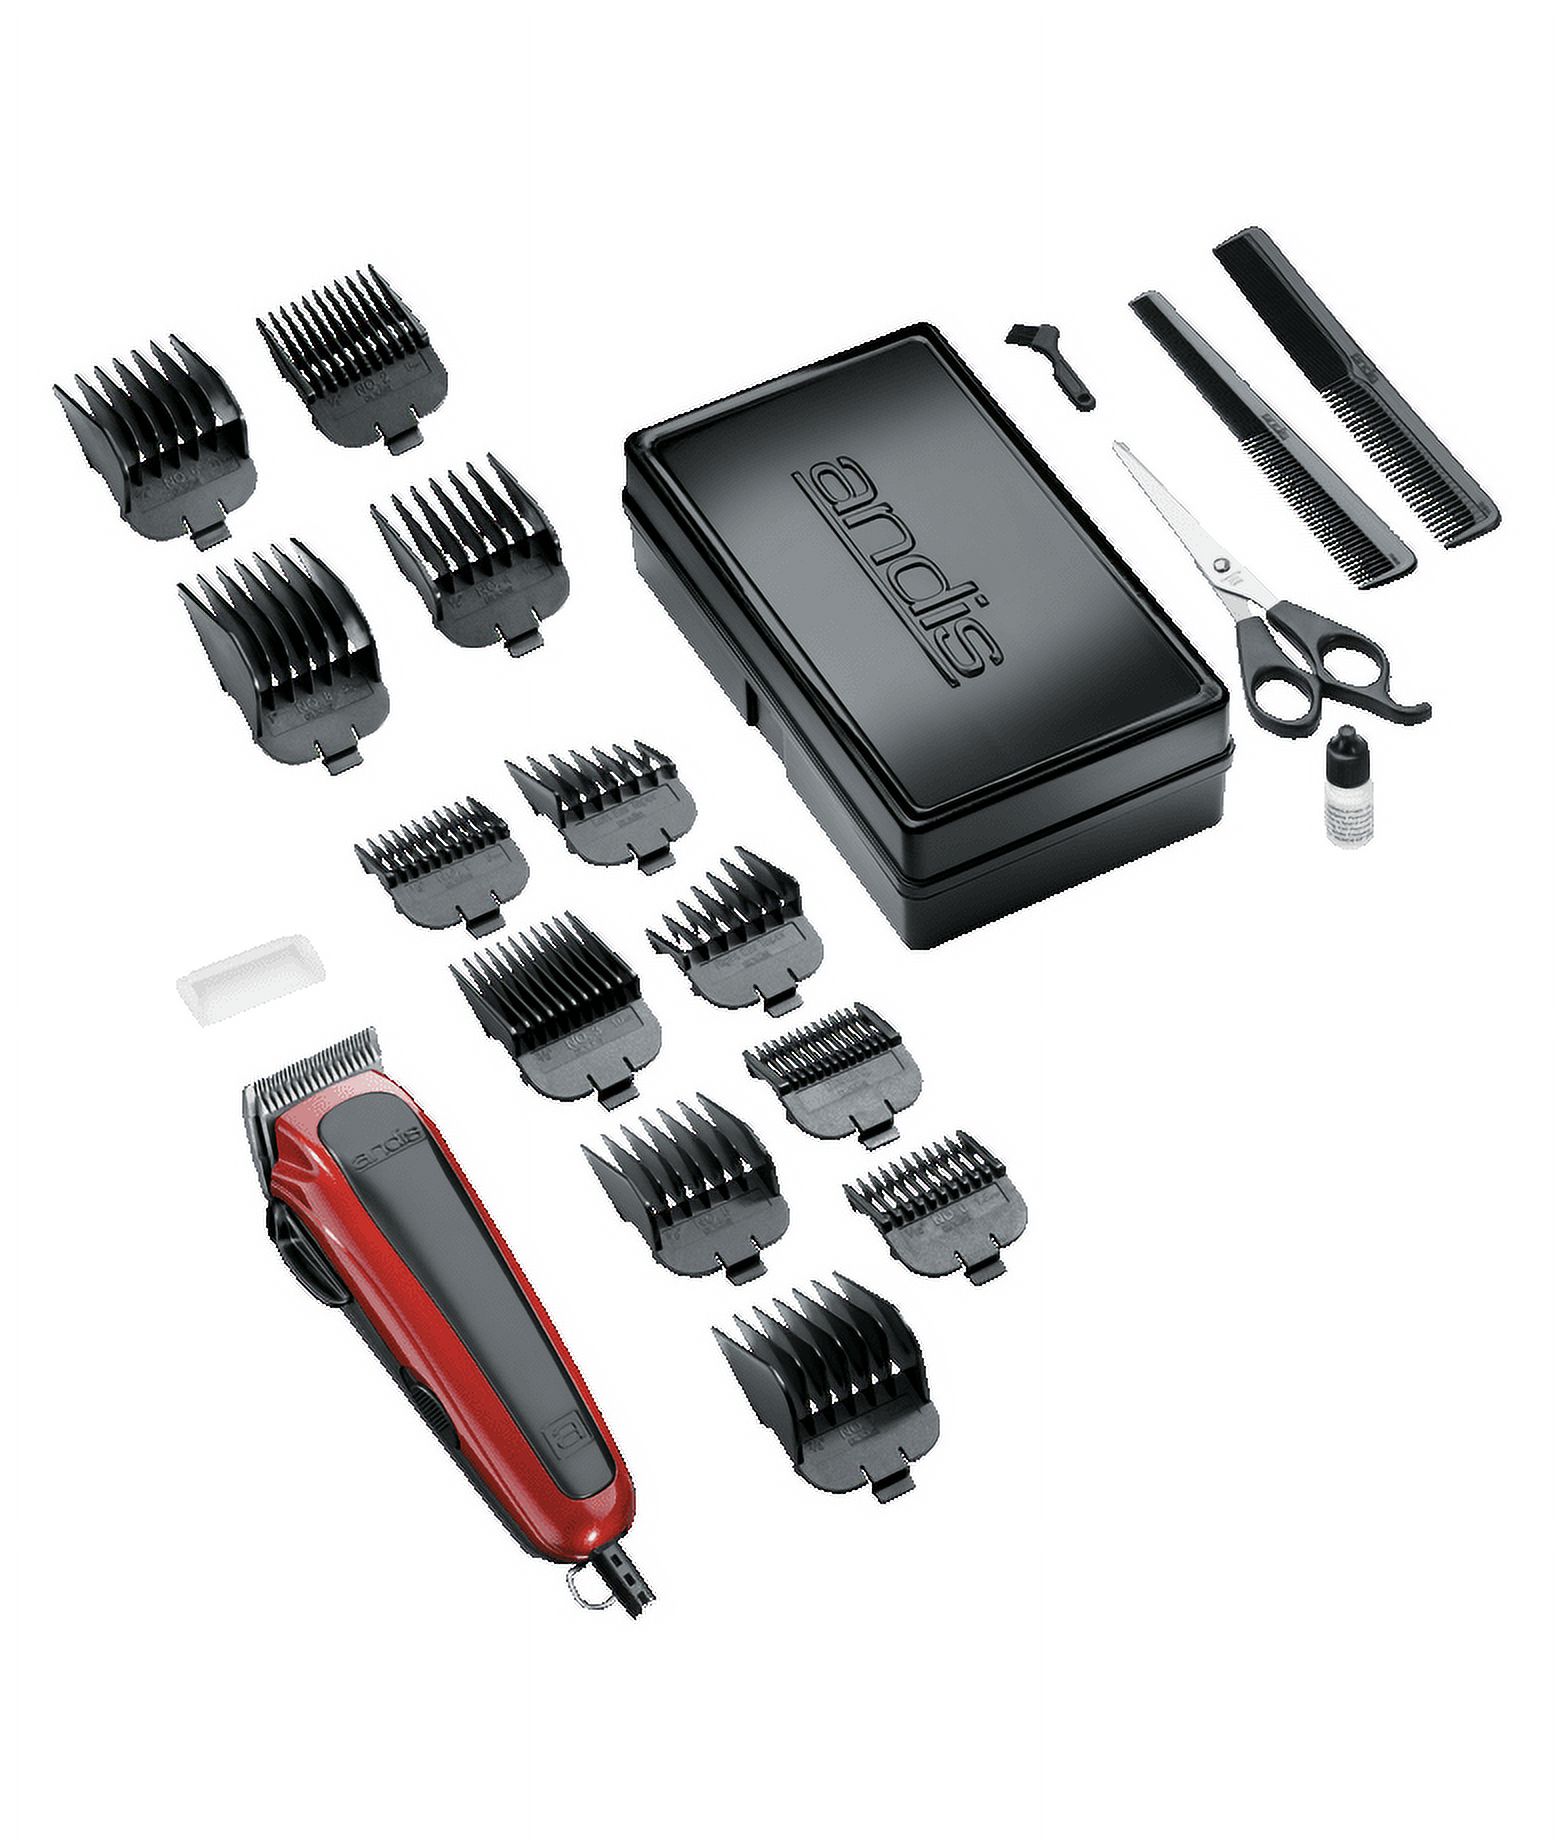 Andis EasyCut Home Haircutting Kit, Black, 20 Piece Kit with Bonus The Cut Buddy - image 3 of 3